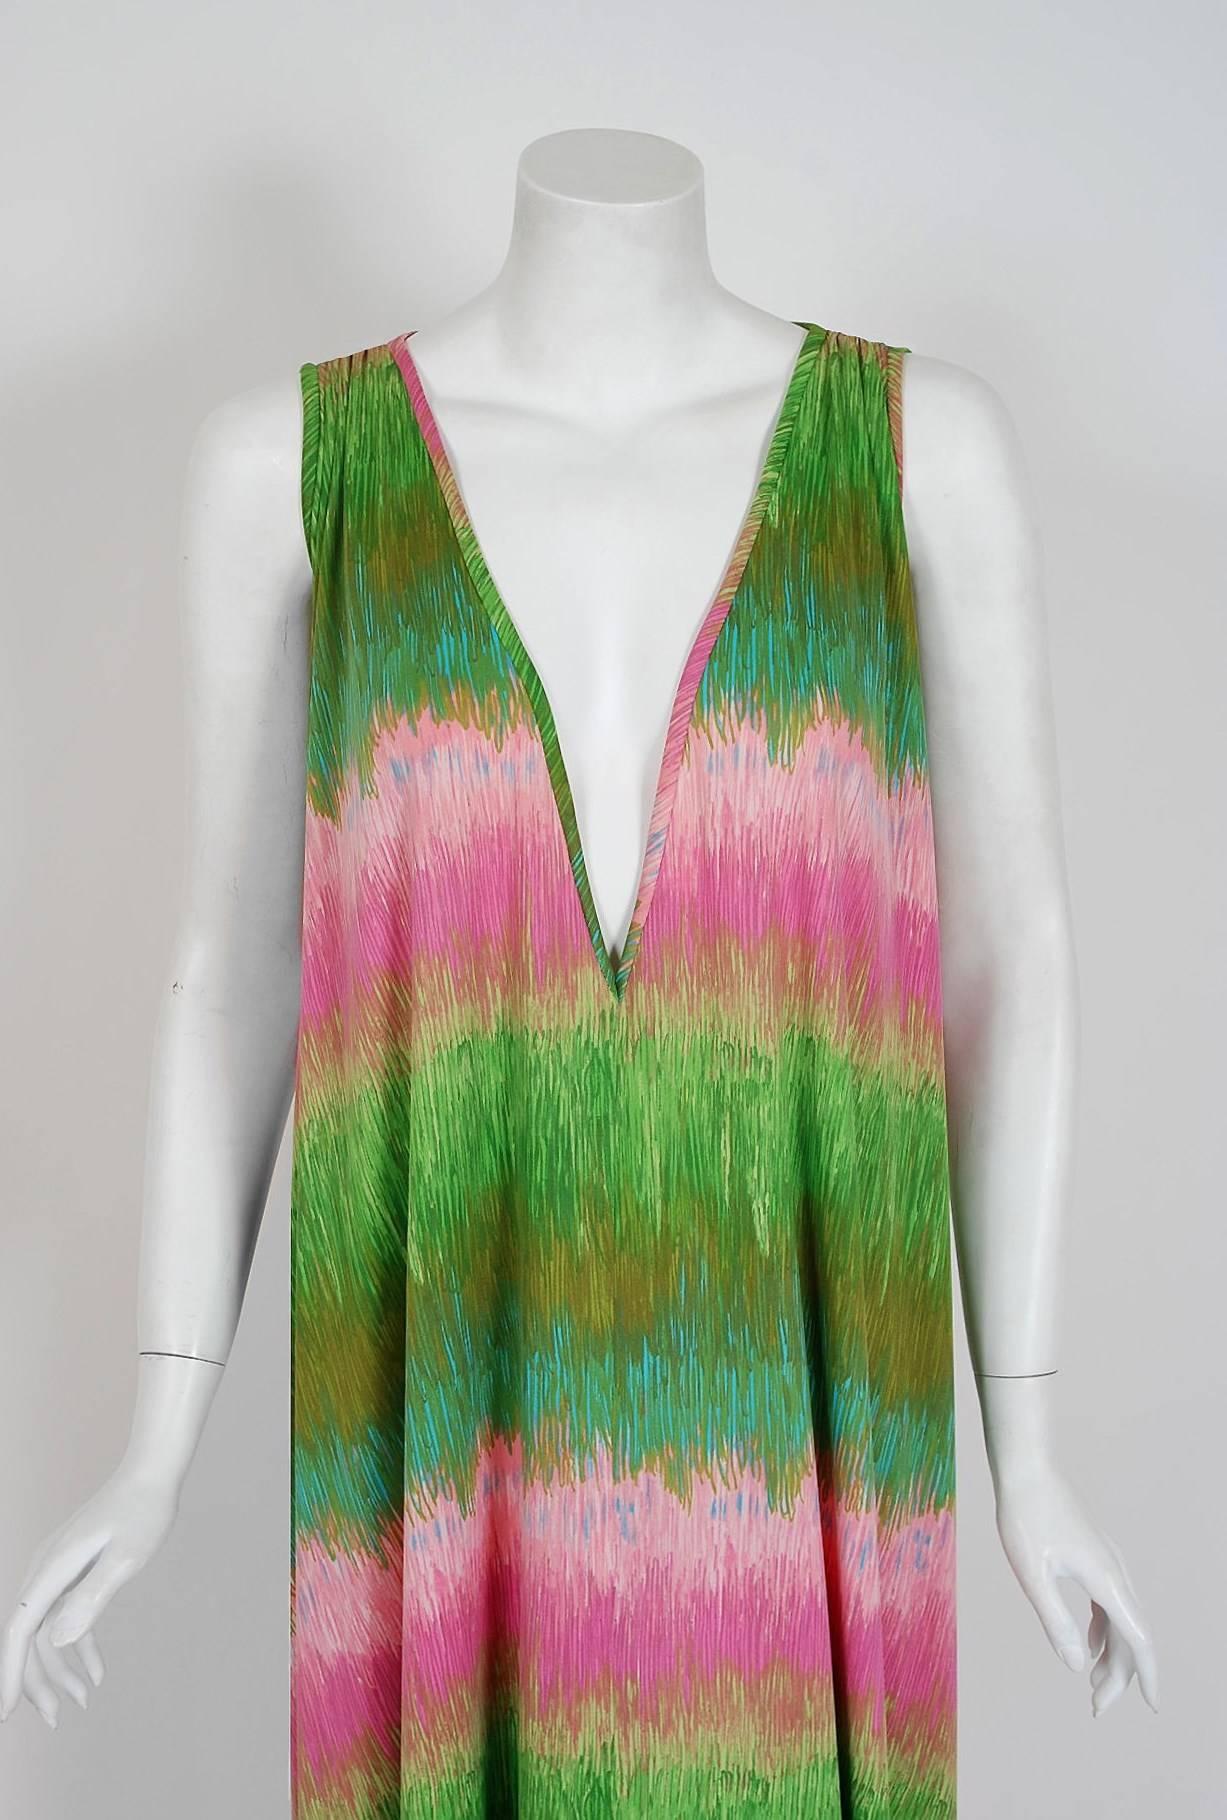 Exquisite 1970's green and pink abstract print dress by the famous 